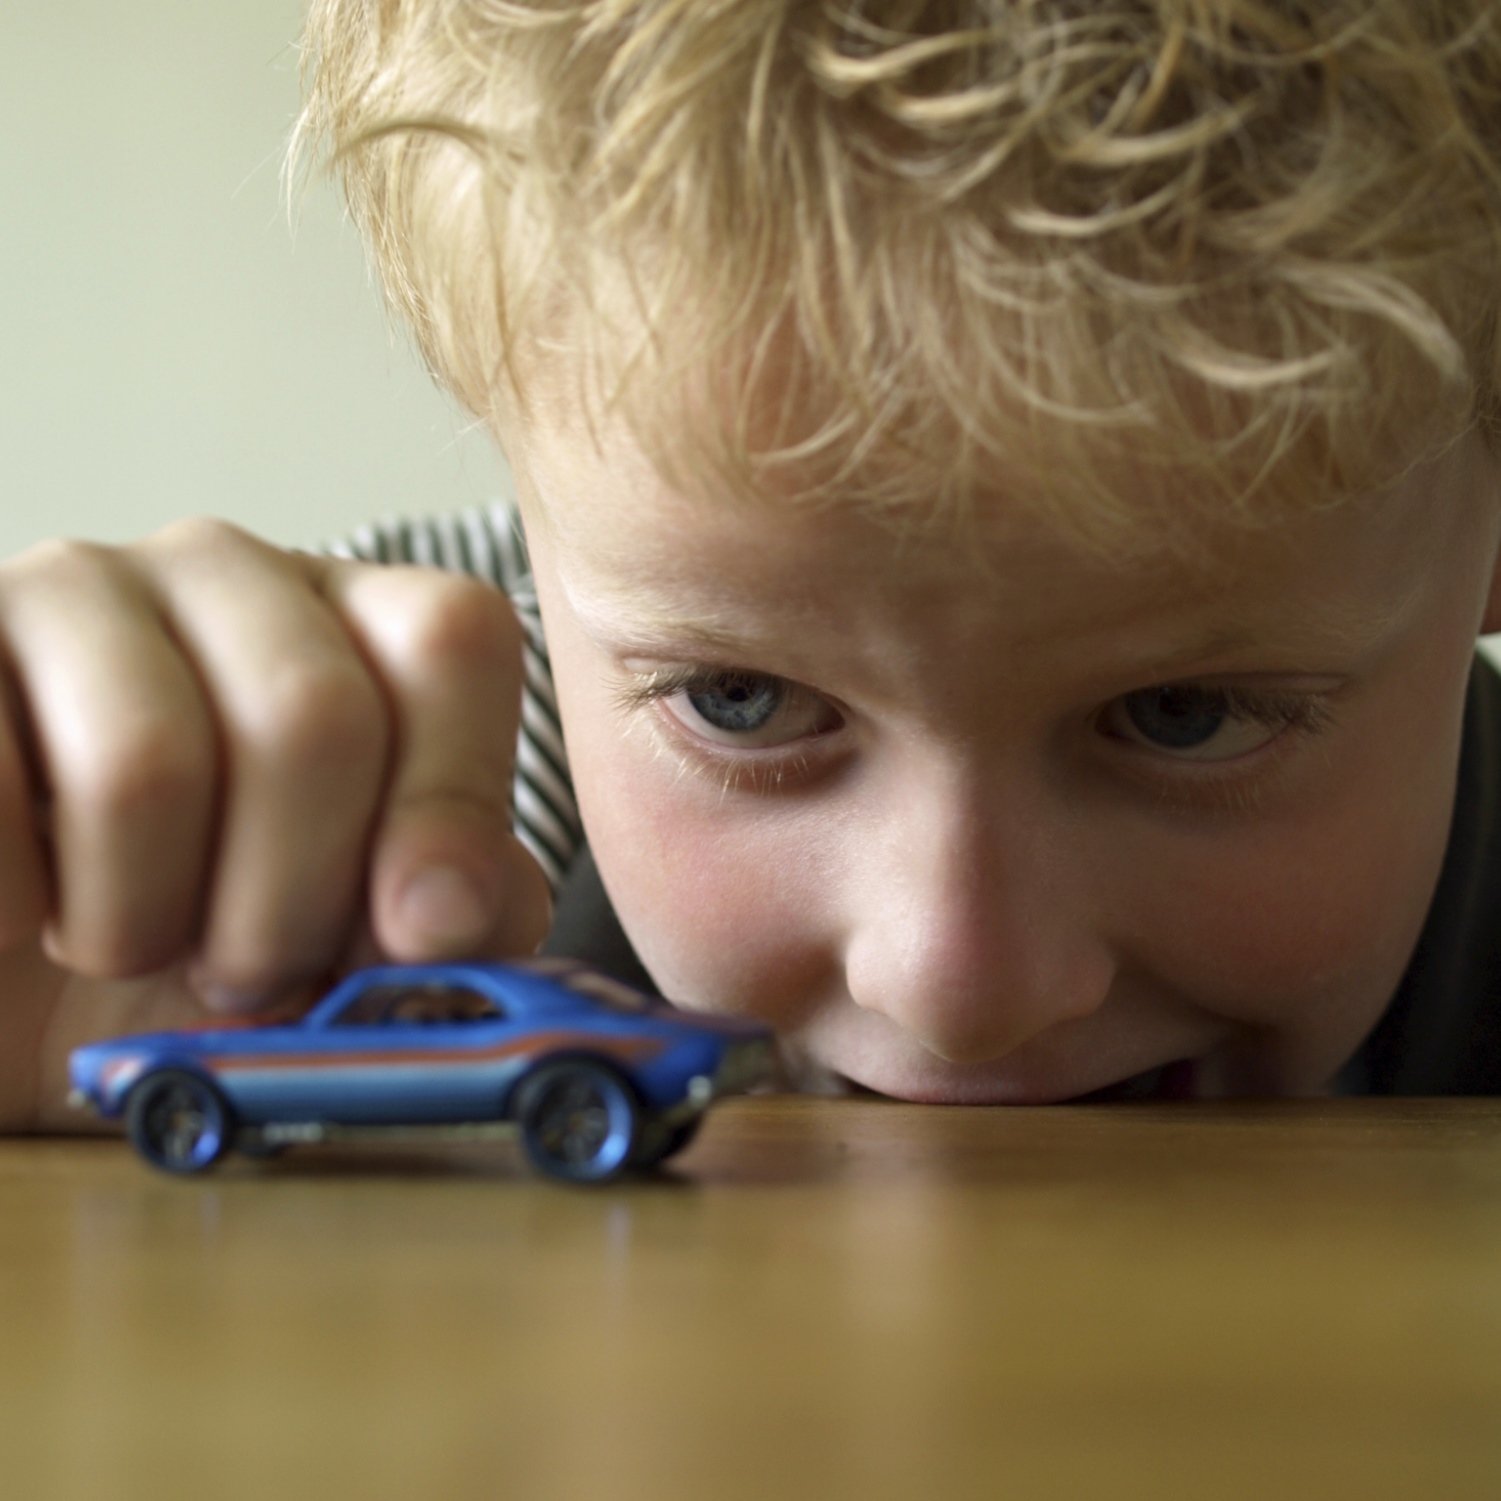 playing with toy car